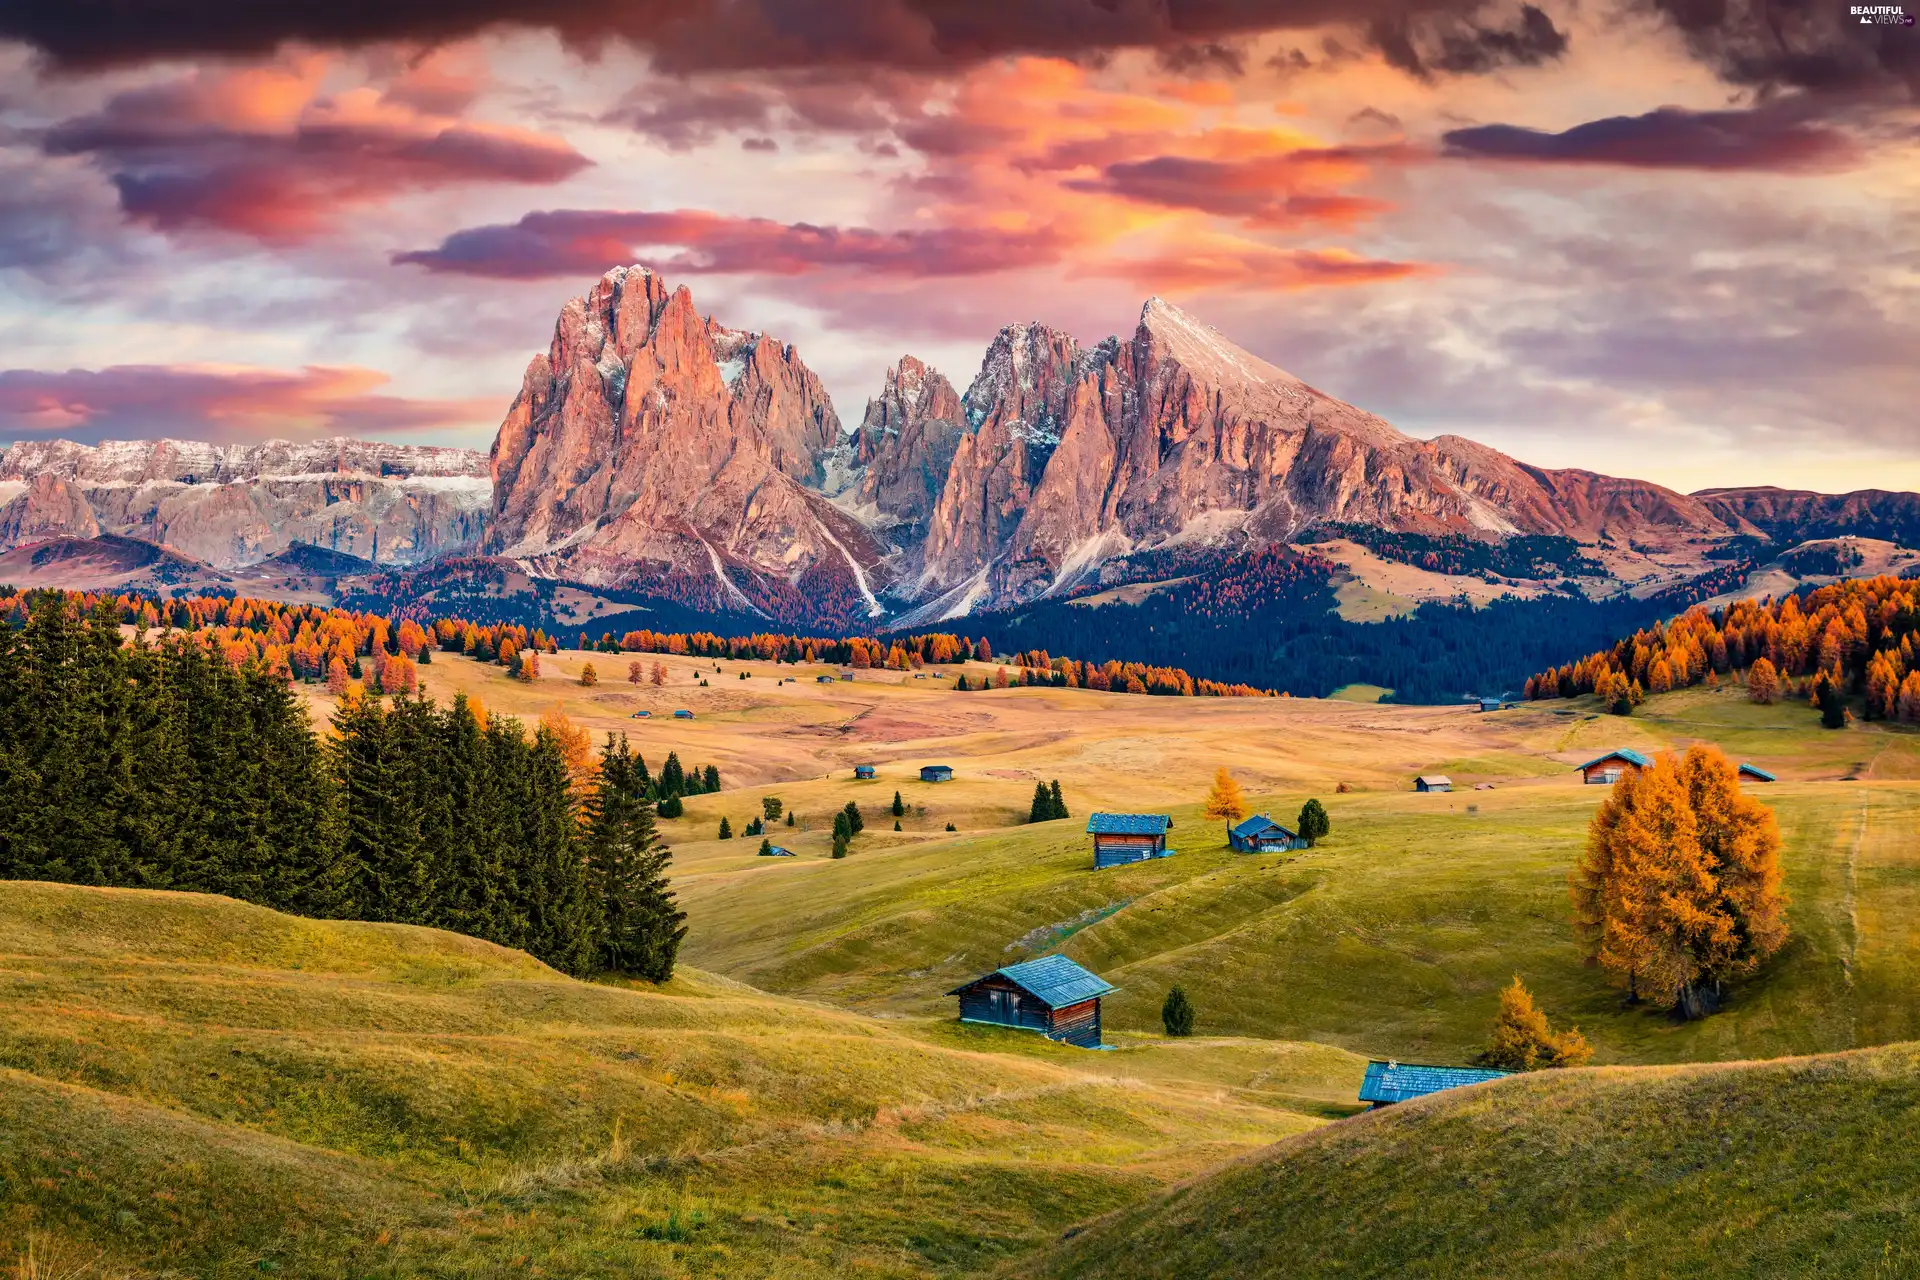 Val Gardena Valley, Sassolungo Mountains, Houses, The Hills, viewes, Italy, Great Sunsets, Seiser Alm Meadow, Dolomites, clouds, trees